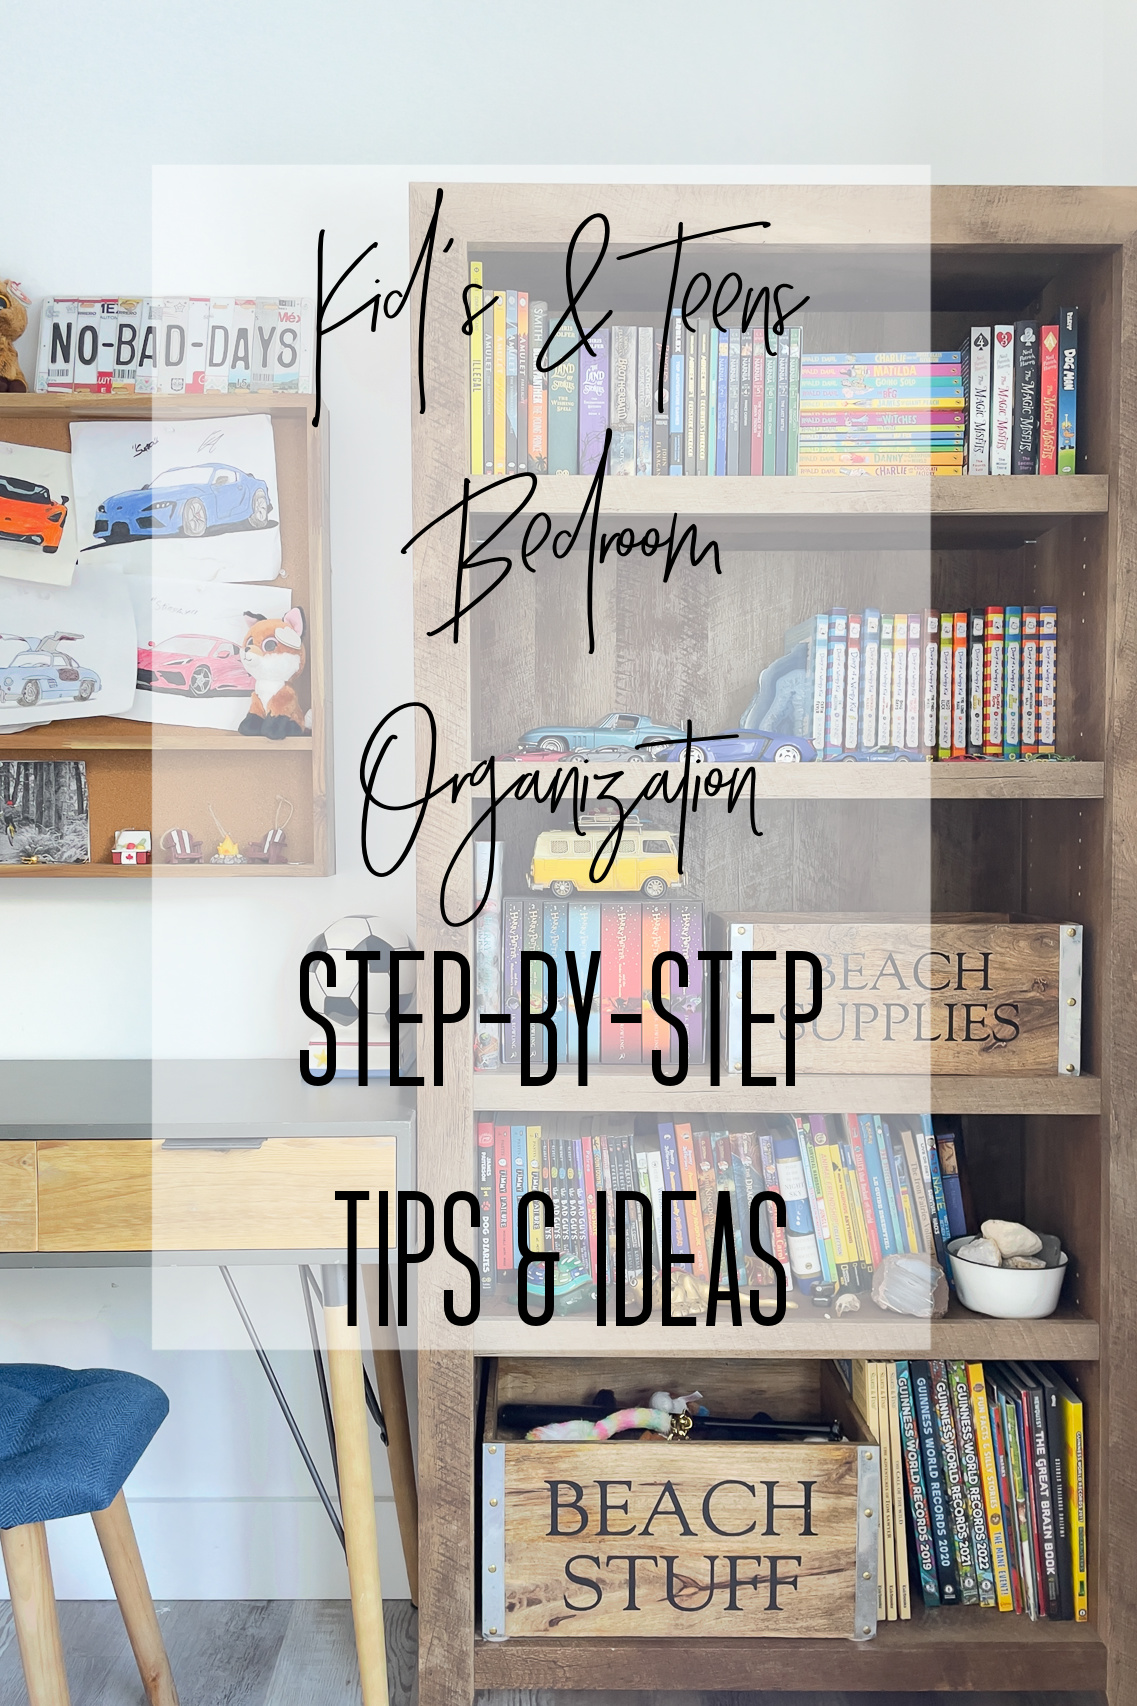 https://www.thehappyhousie.com/wp-content/uploads/2022/02/kids-and-teen-bedroom-organization-steps-by-step-tips-and-ideas-1-1.jpg